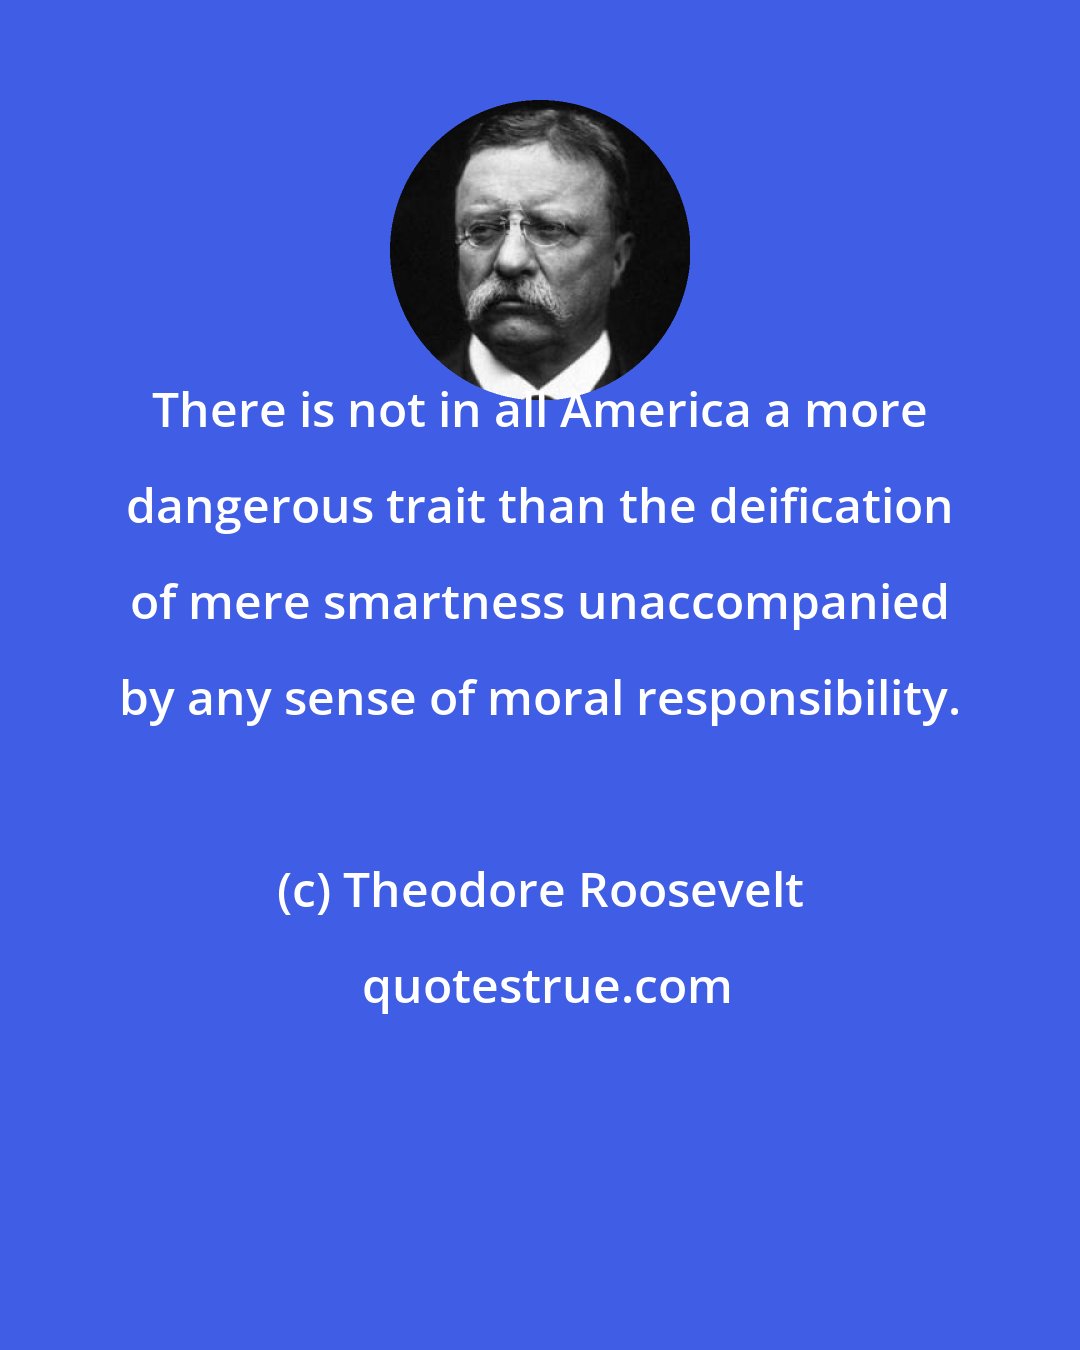 Theodore Roosevelt: There is not in all America a more dangerous trait than the deification of mere smartness unaccompanied by any sense of moral responsibility.